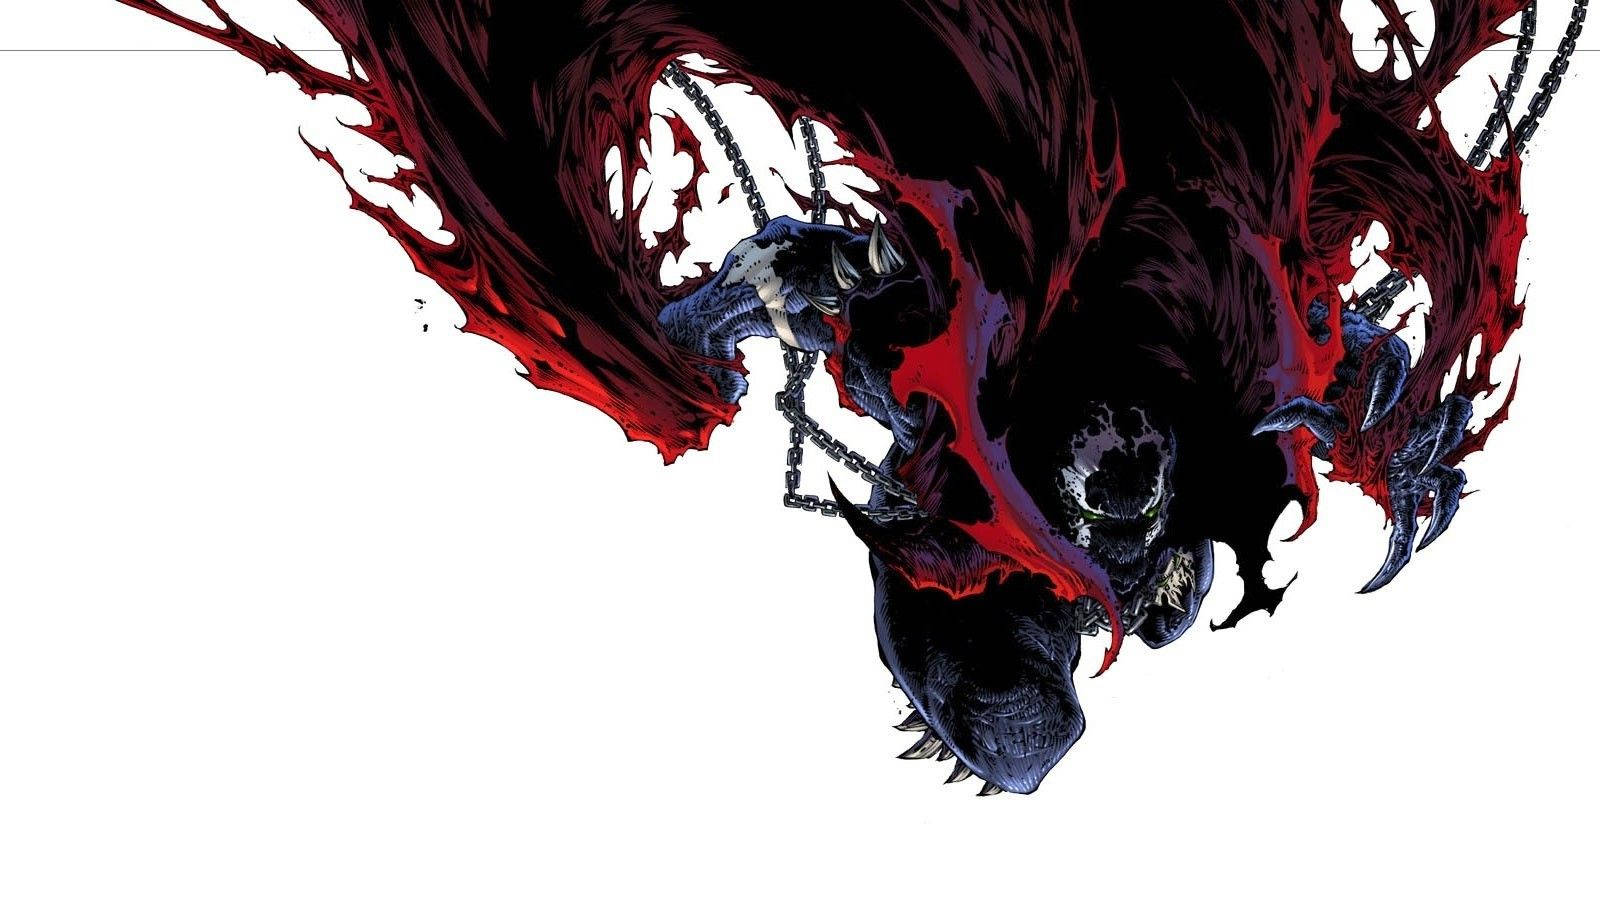 Spawn comic art with its bloody red cape and his long metal chains wallpaper 